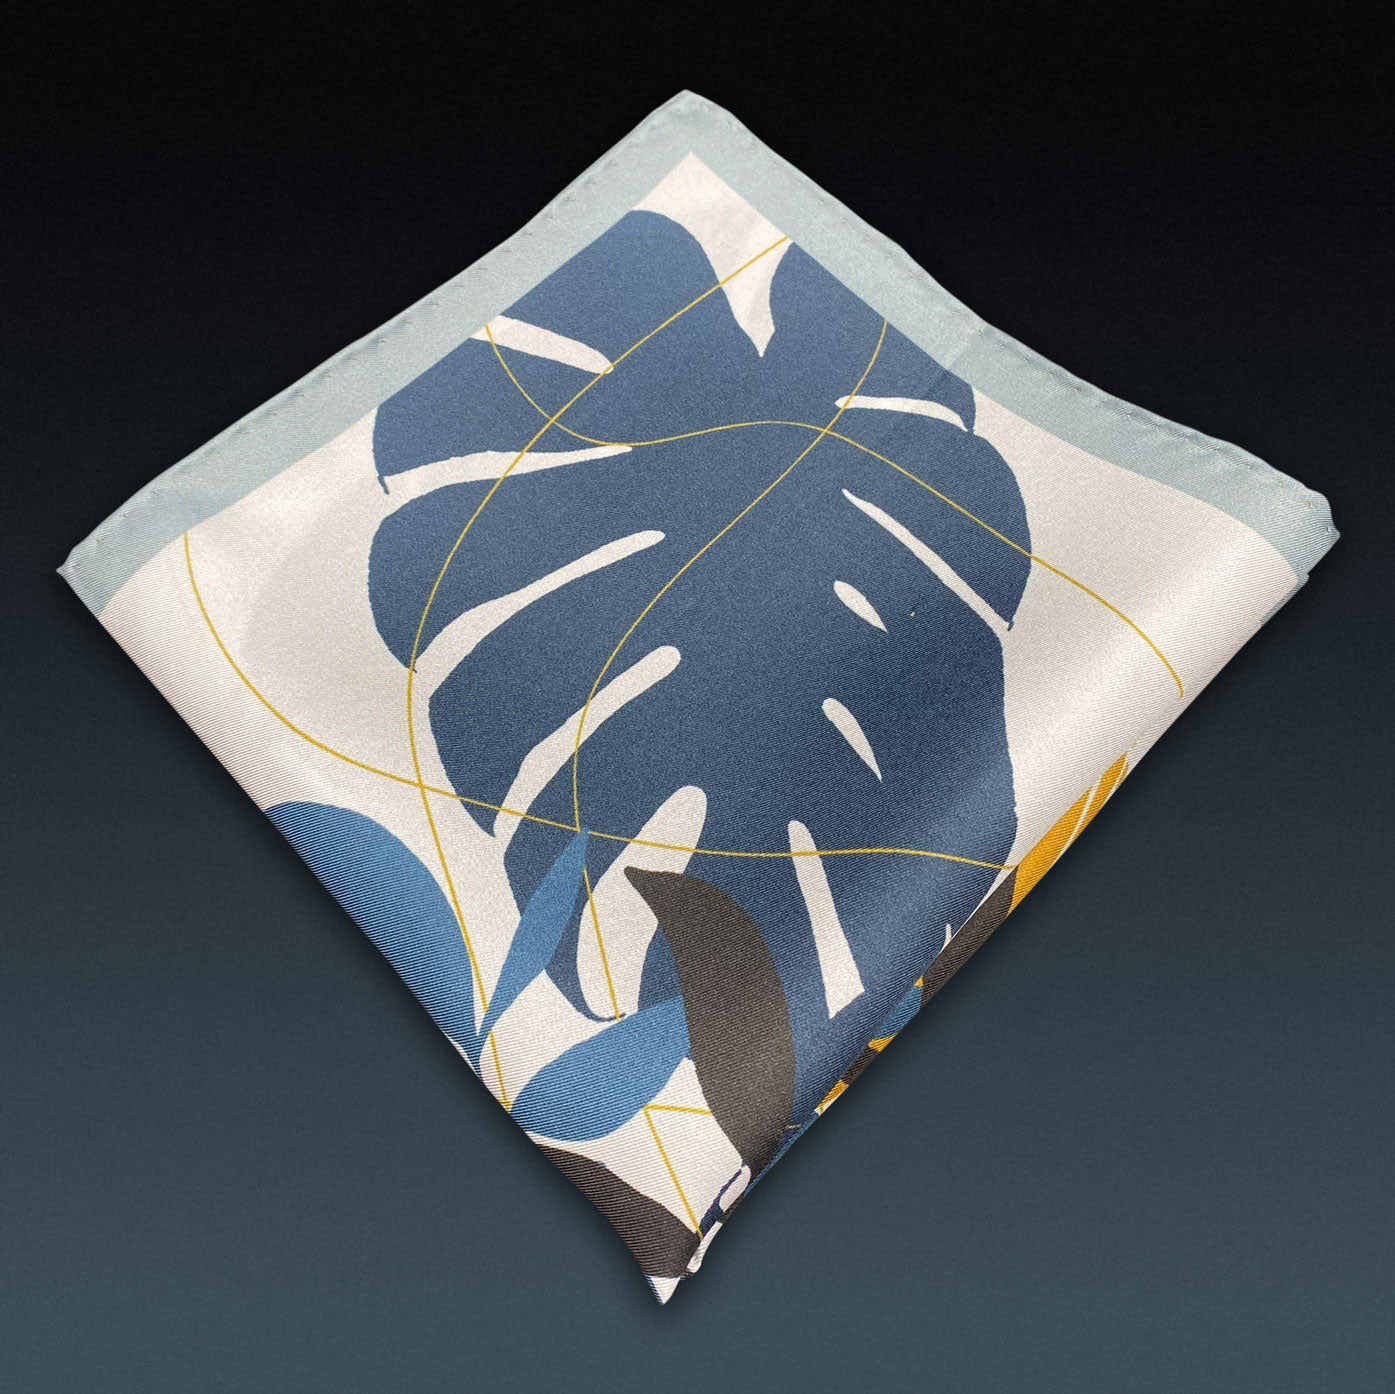 Folded 'Tyne' silk pocket square from SOHO Scarves, showing the floral-sun pattern. Placed on a dark background.